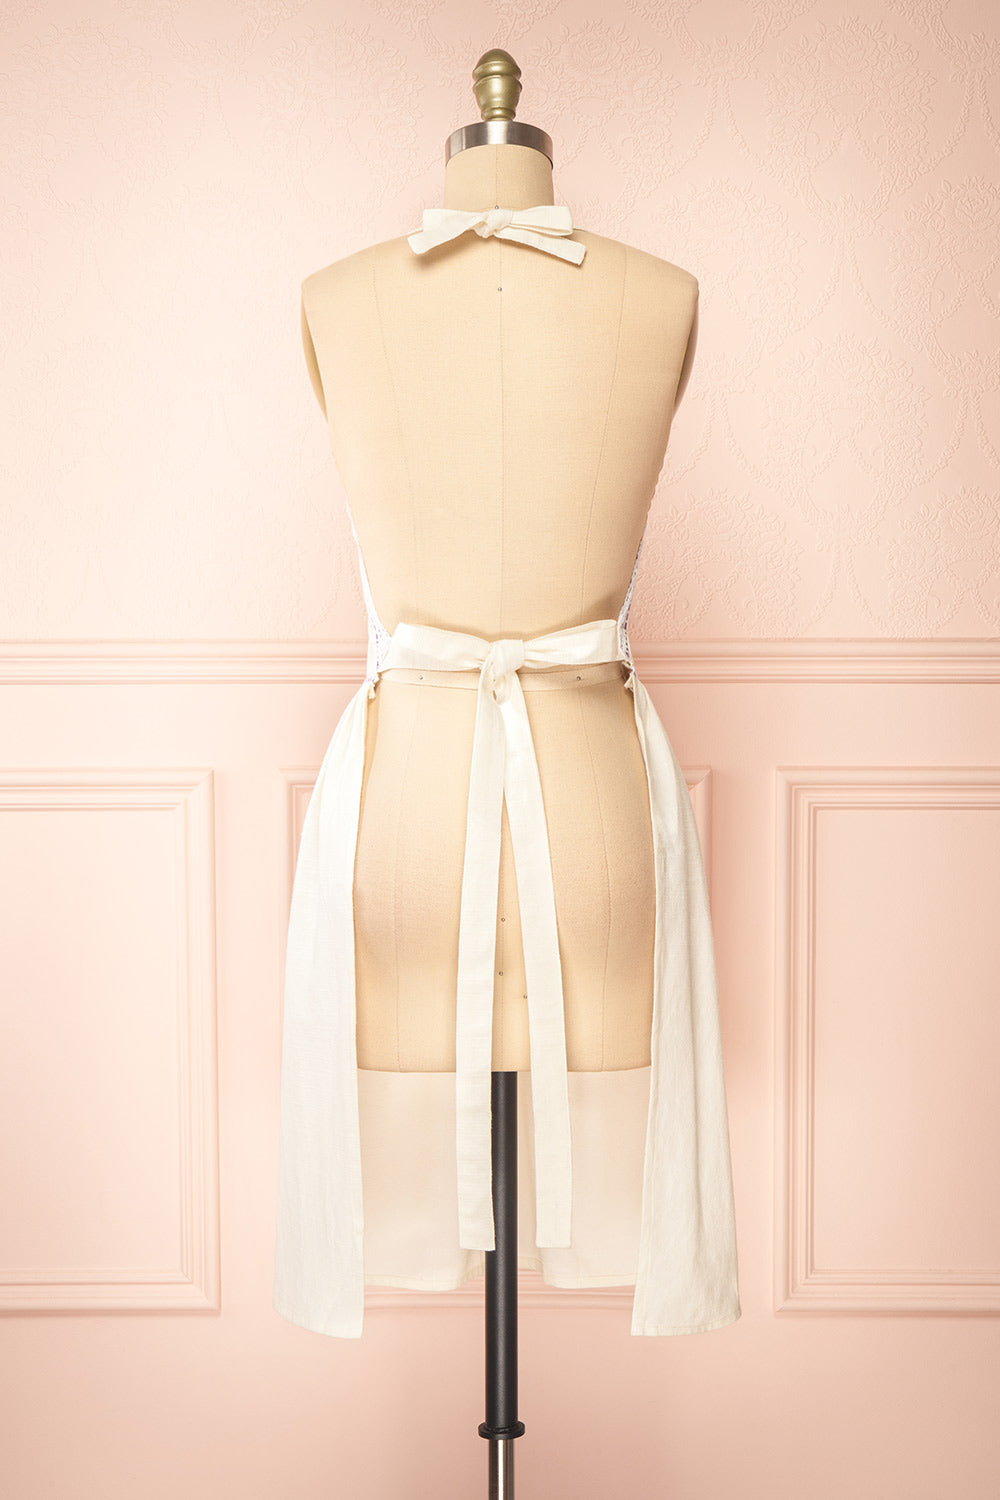 Cornwall White Apron with Embroidered Lavender | Boutique 1861 back view